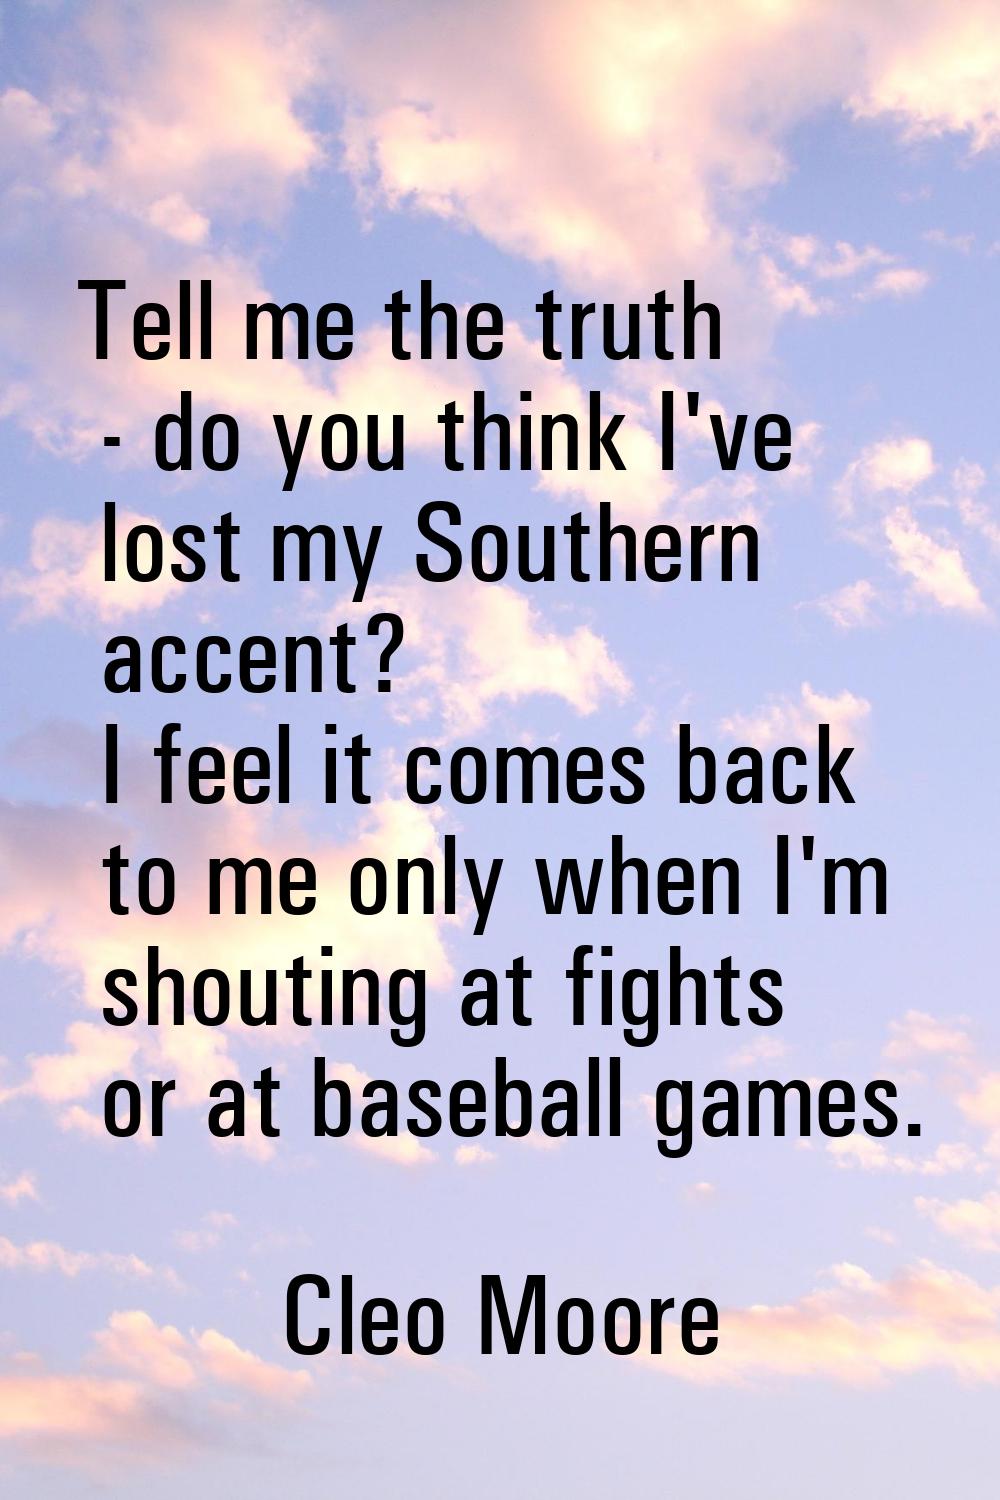 Tell me the truth - do you think I've lost my Southern accent? I feel it comes back to me only when